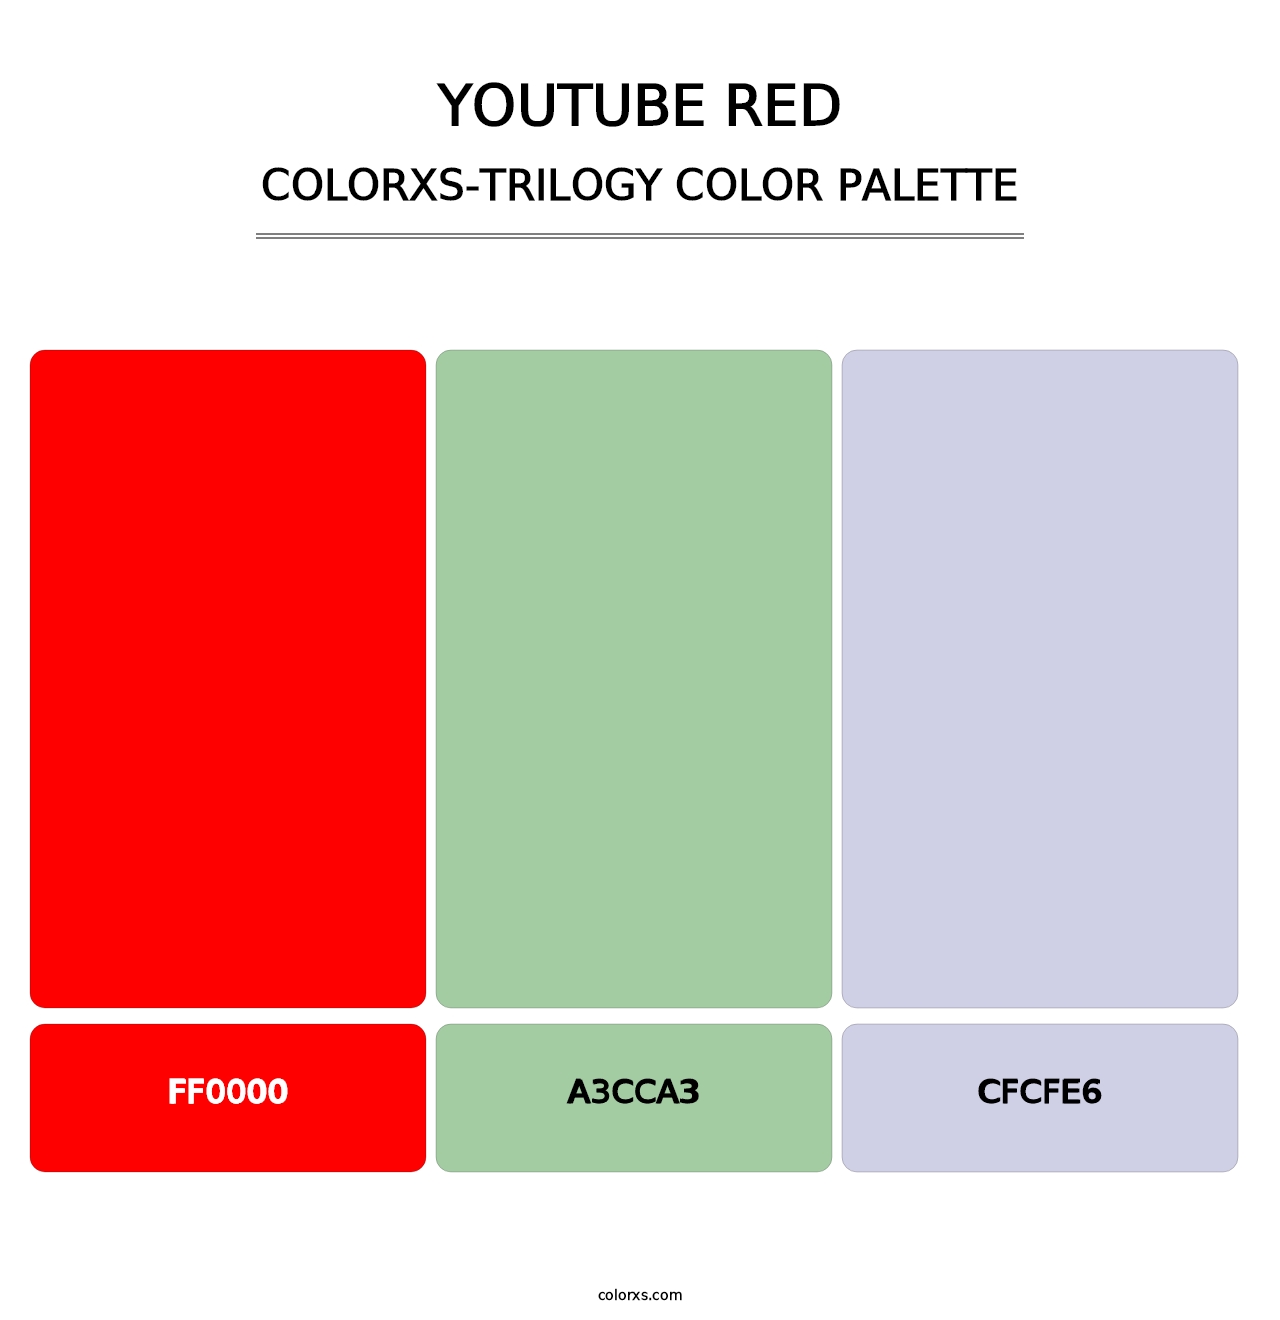 YouTube Red - Colorxs Trilogy Palette